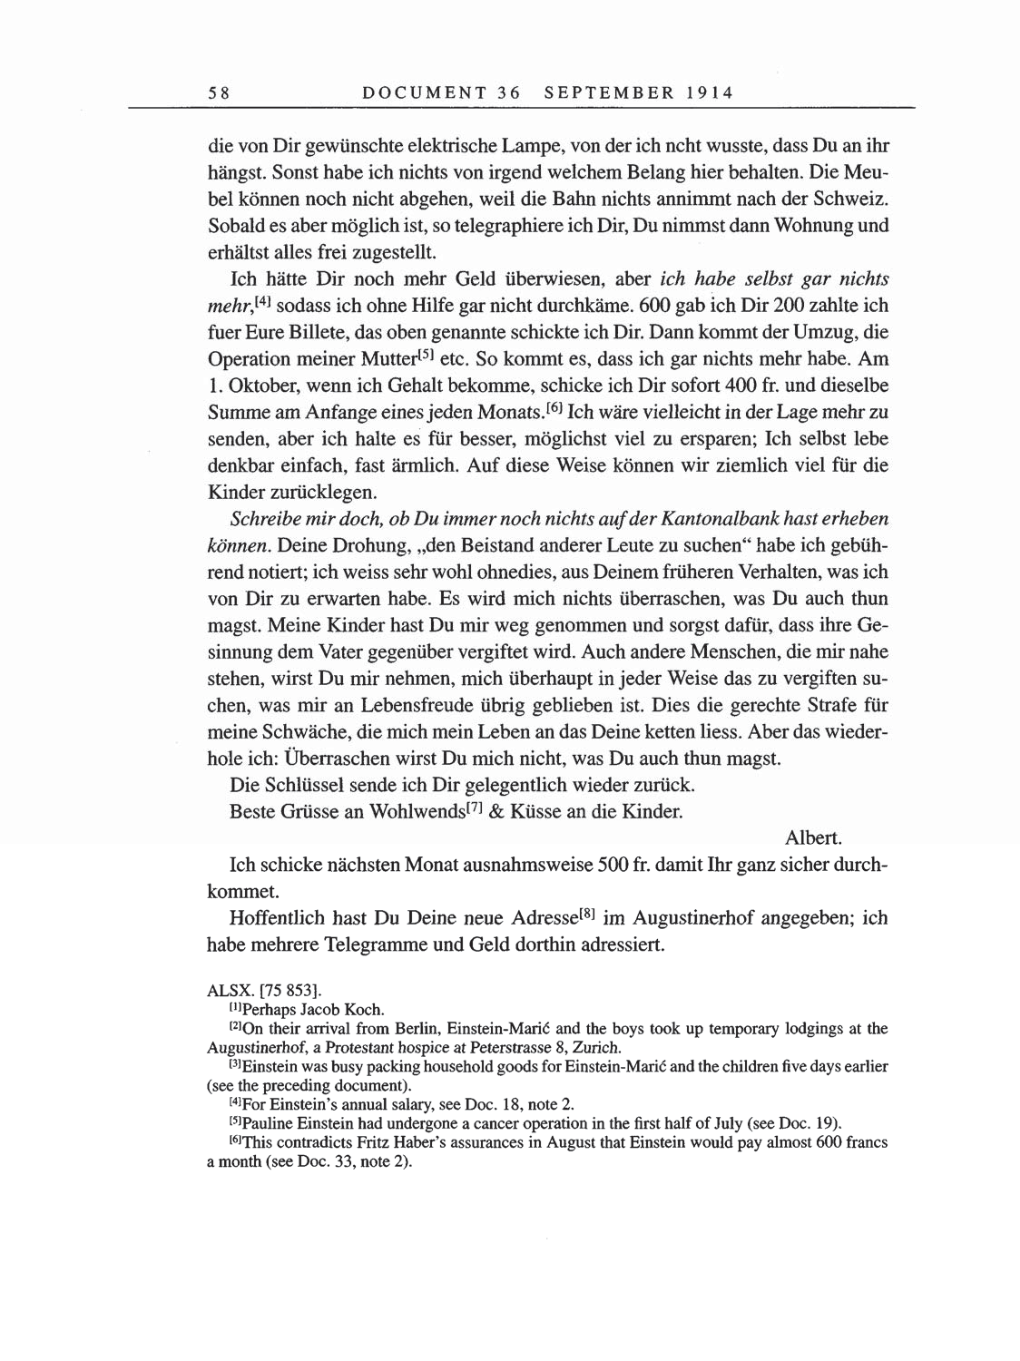 Volume 8, Part A: The Berlin Years: Correspondence 1914-1917 page 58